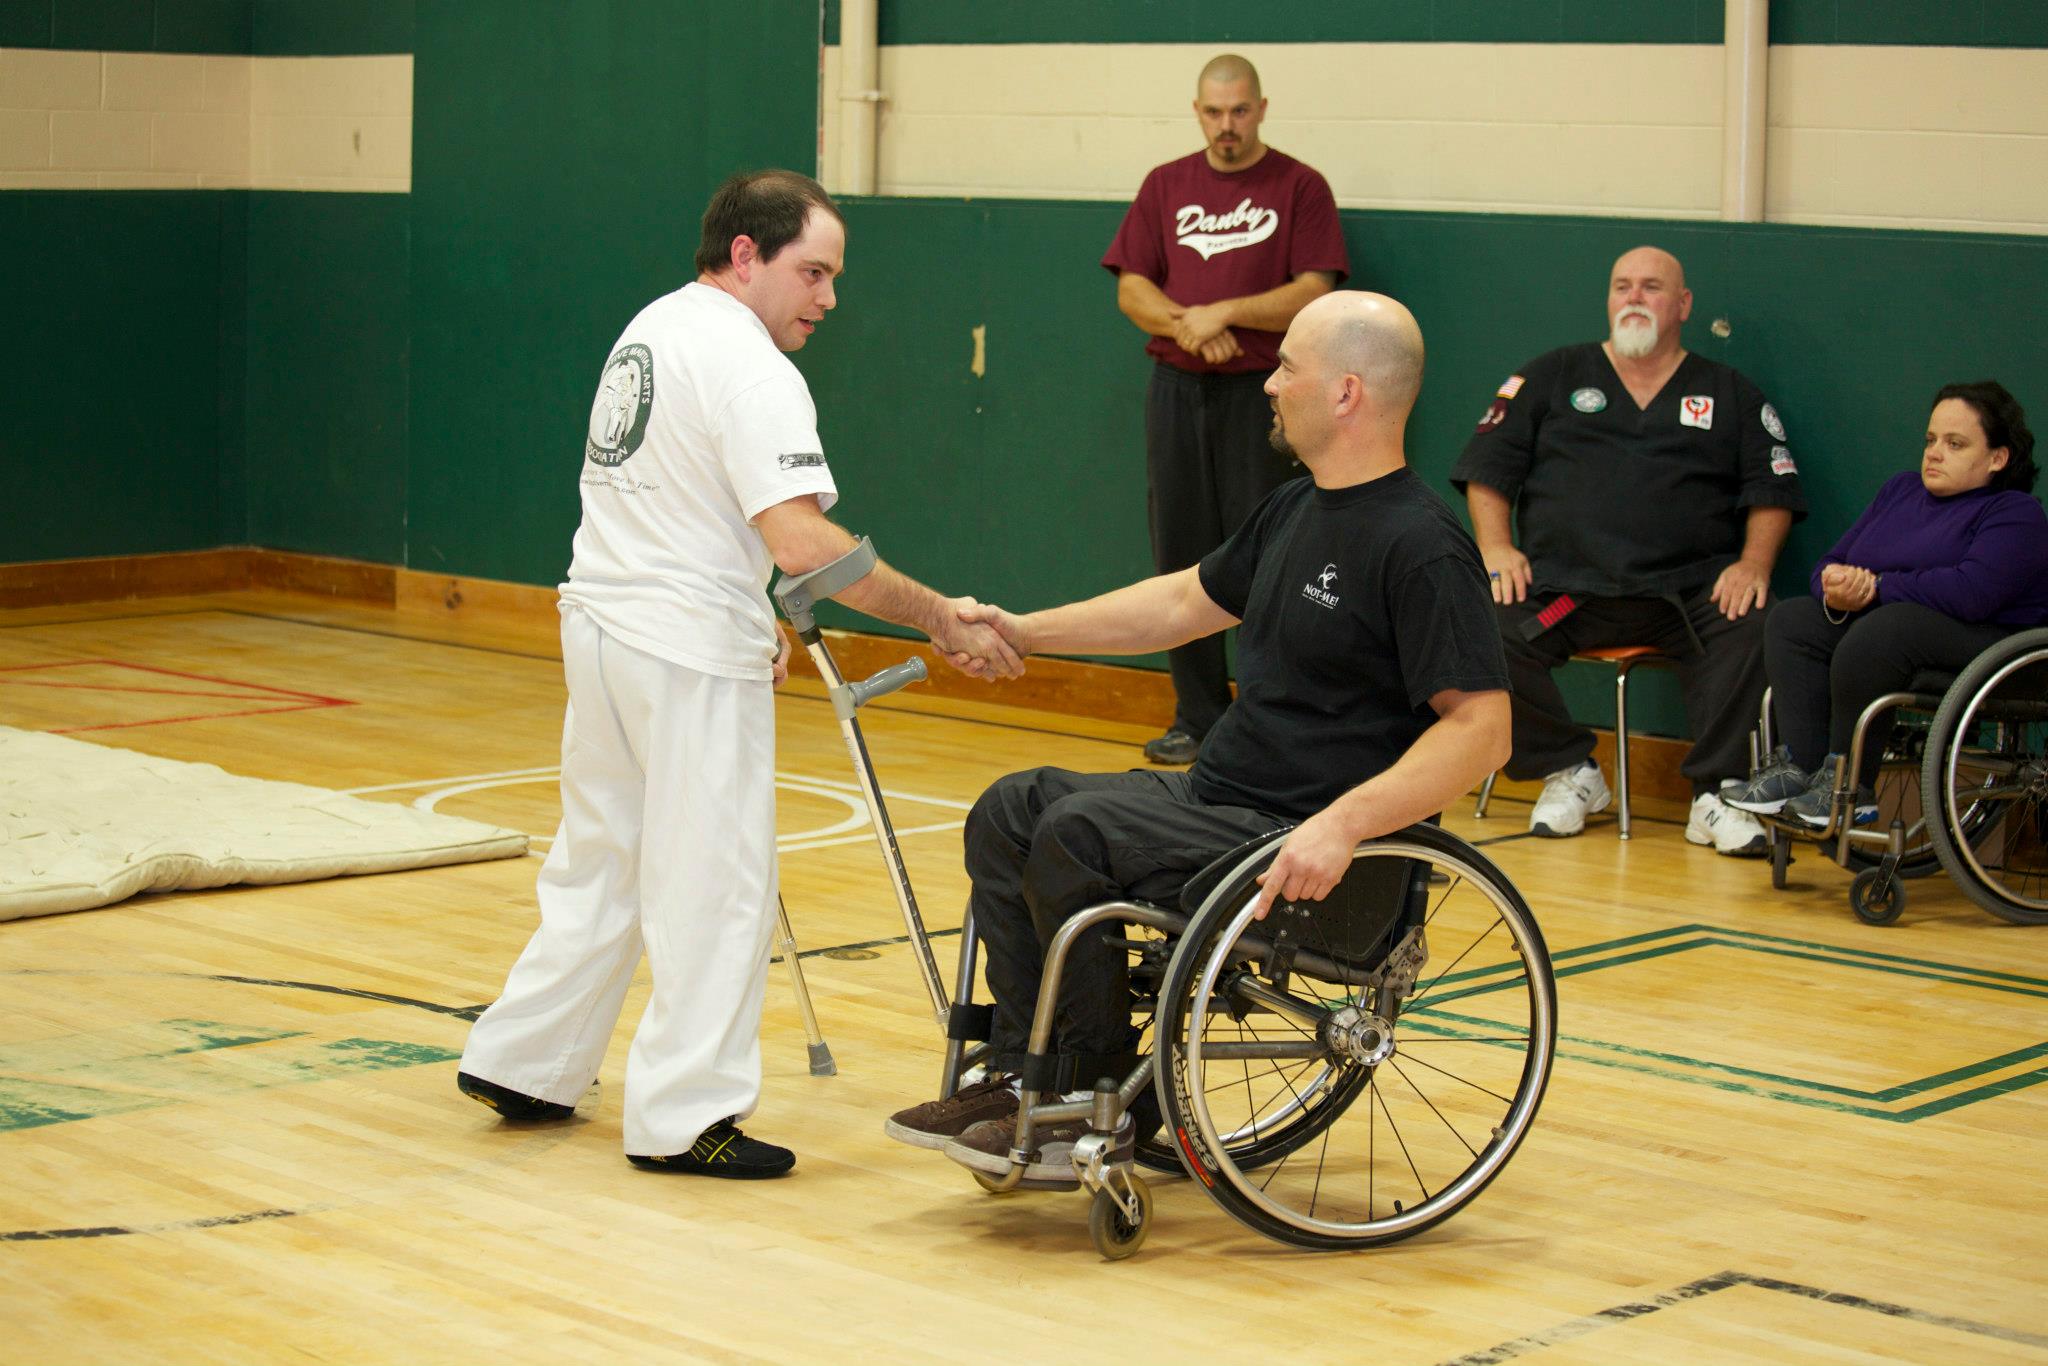 two male martial artists shaking hands; one man is wearing white and is standing and the other man is wearing black and uses a wheelchair for mobility. Three martial artists are shown in the background.